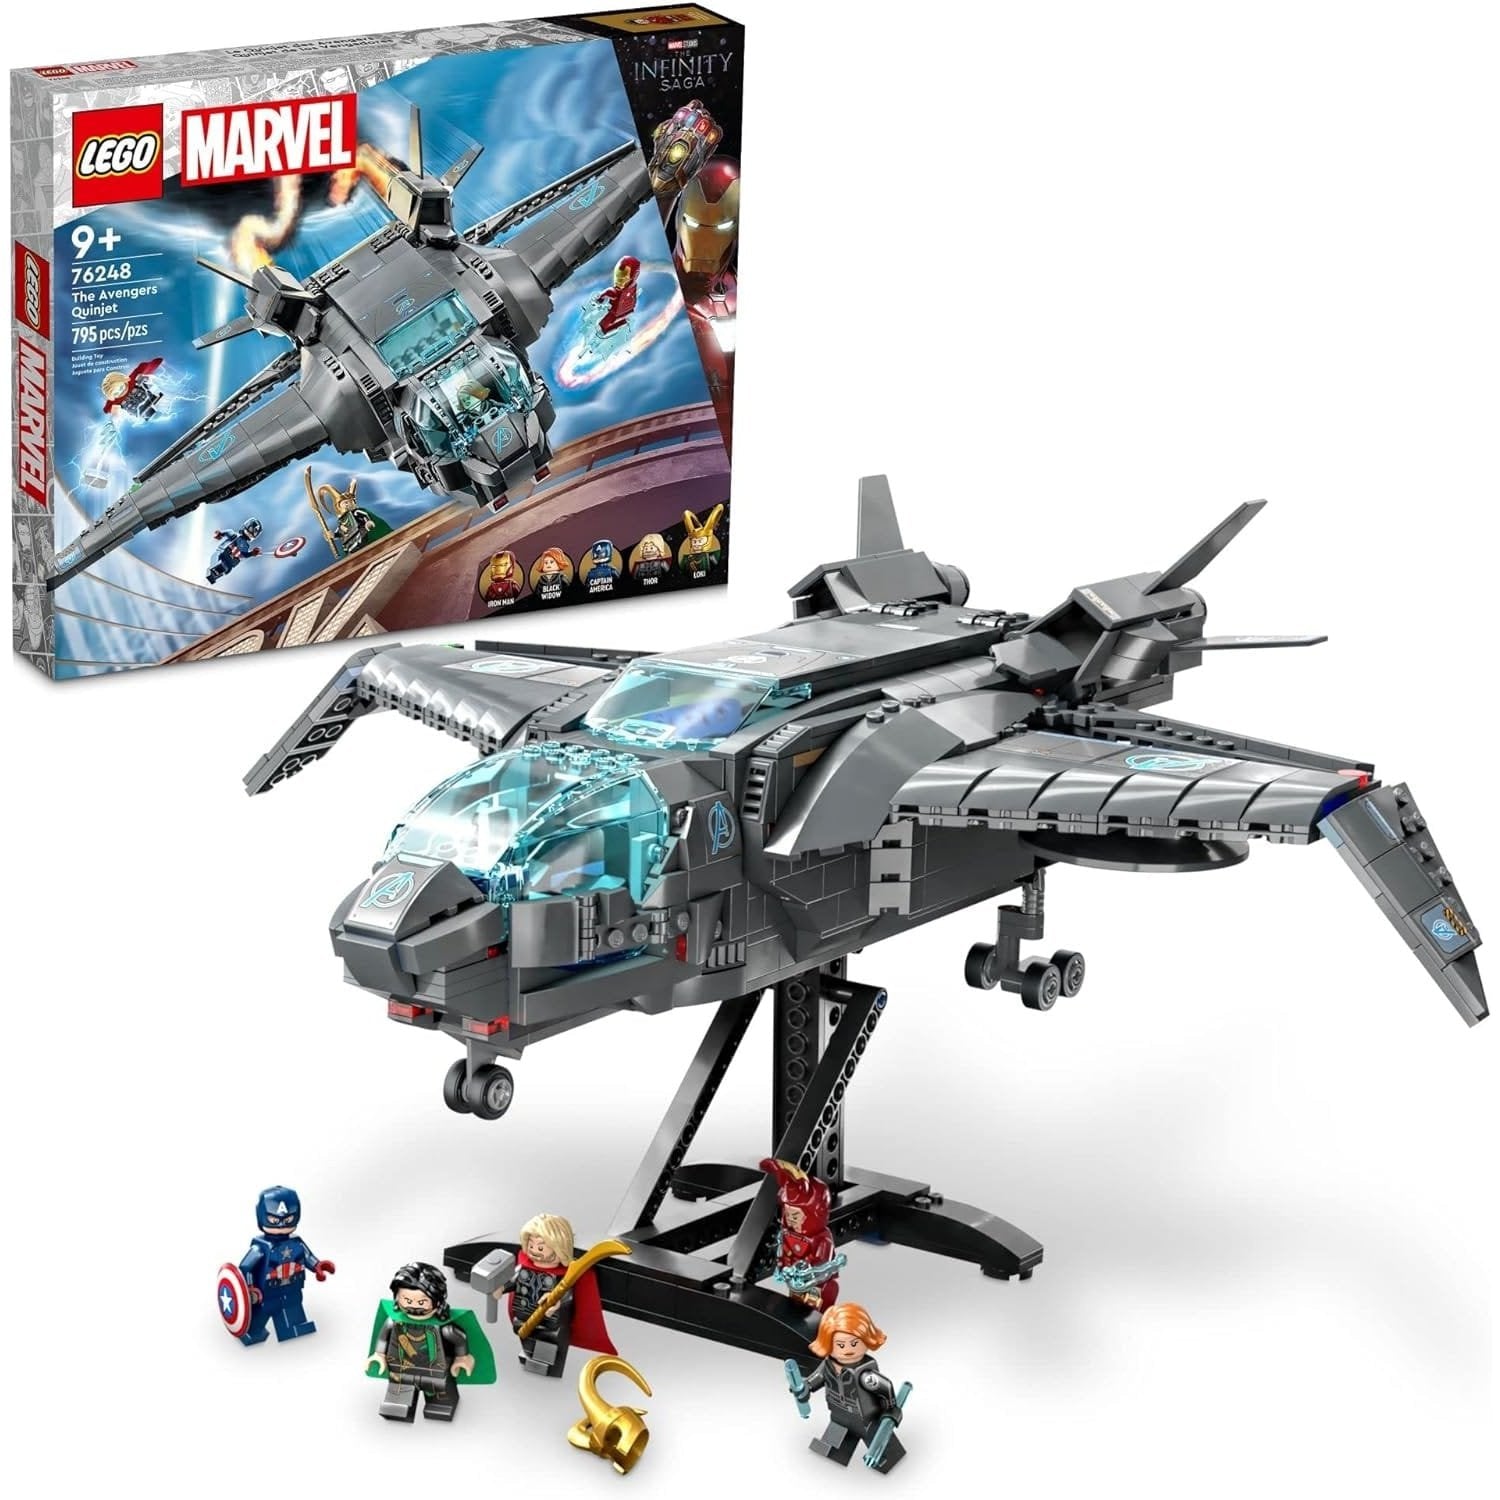 LEGO Marvel The Avengers Quinjet 76248, Spaceship Building Toy Set with Thor, Iron Man, Black Widow, Loki and Captain America Minifigures LEGO